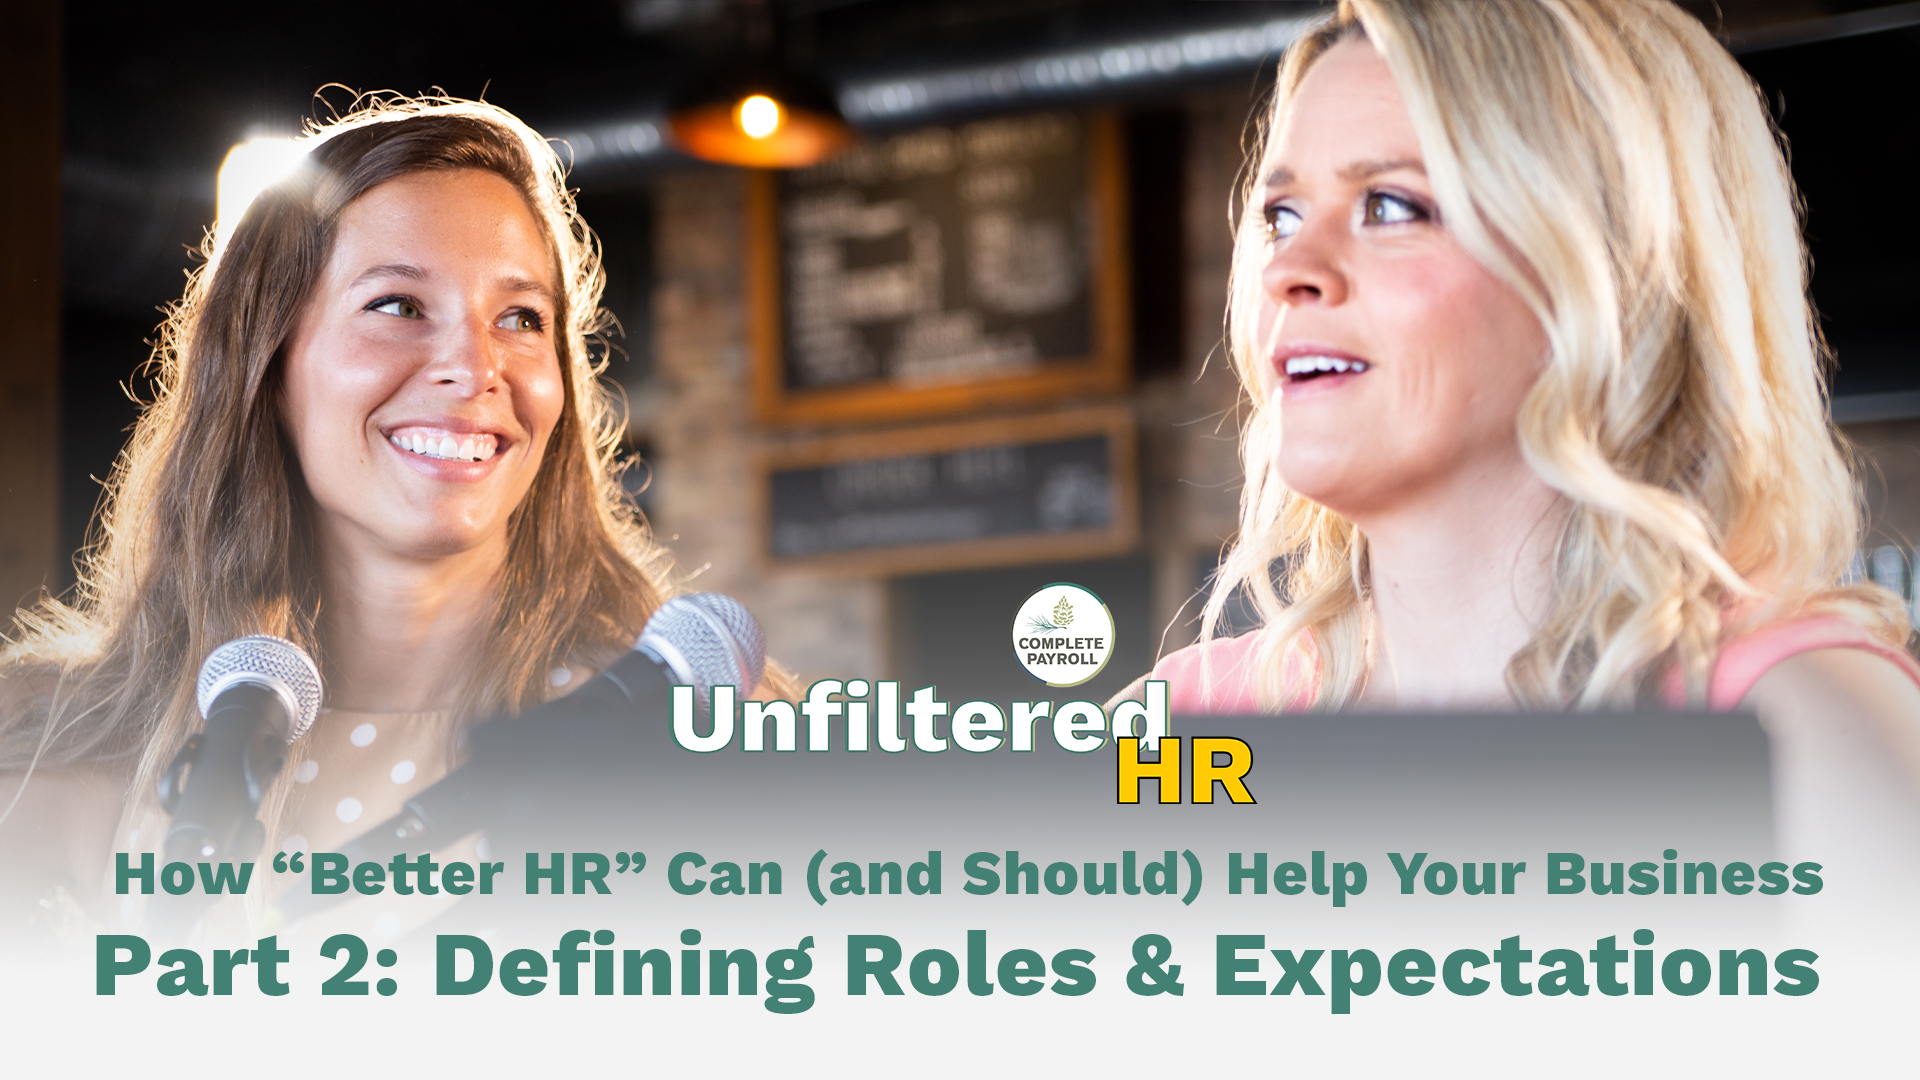 5 Lessons for Better HR, Part 2: Defining Roles & Expectations | Unfiltered HR